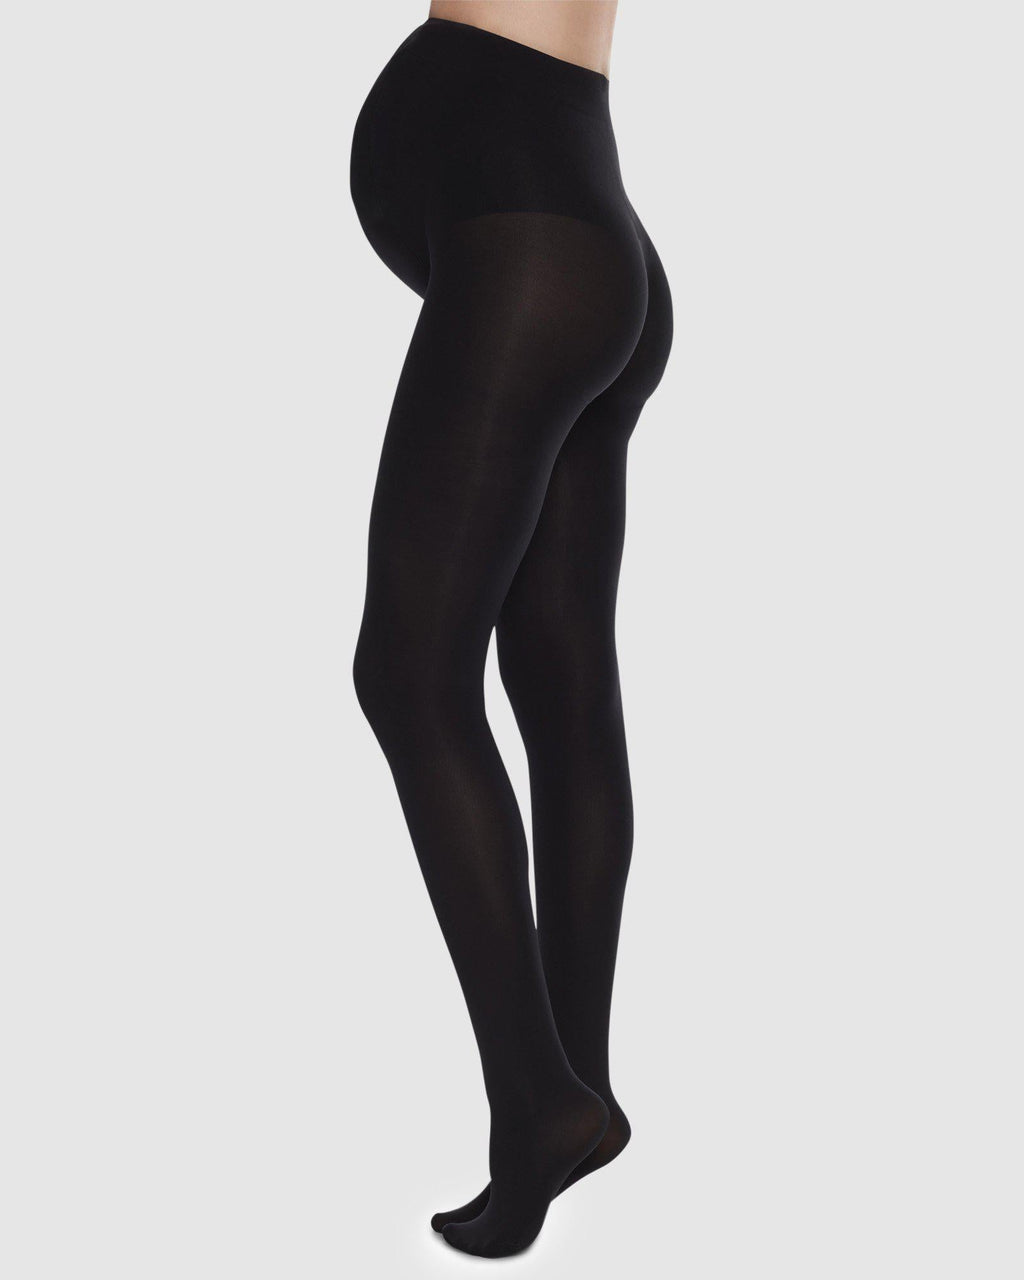 Buy Black 200 Denier Maternity Tights from Next Luxembourg